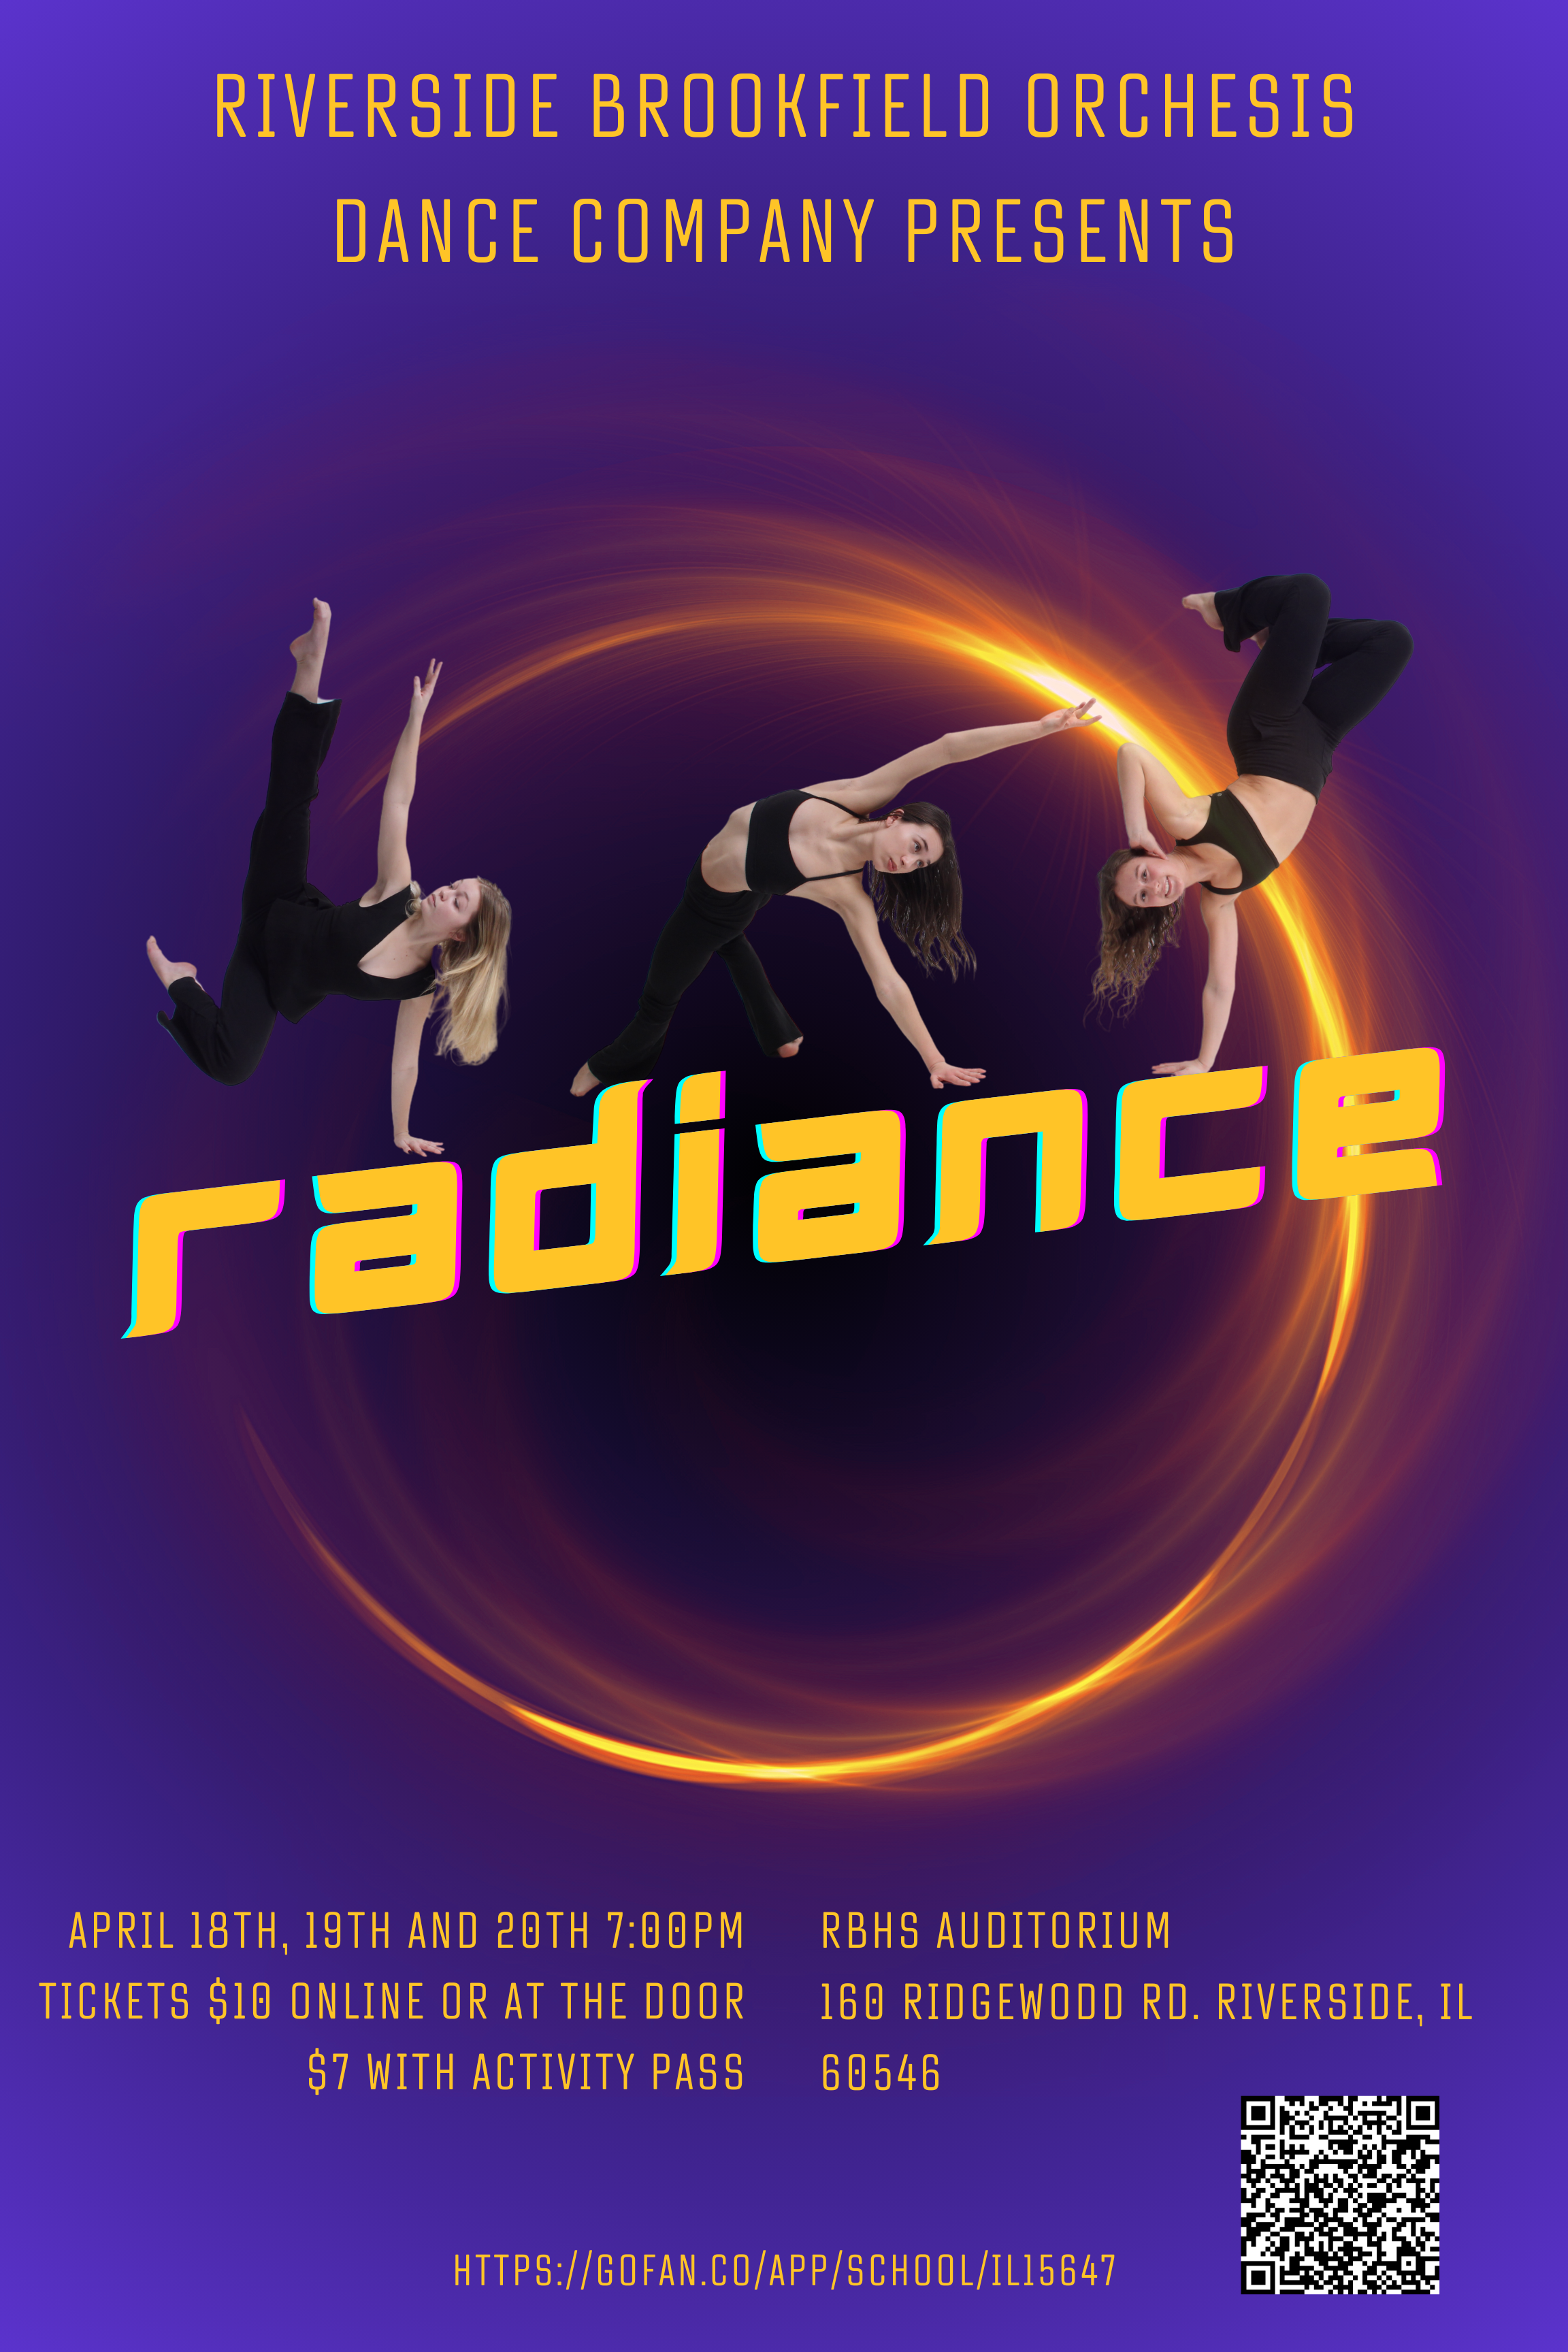 radiance orchesis performance